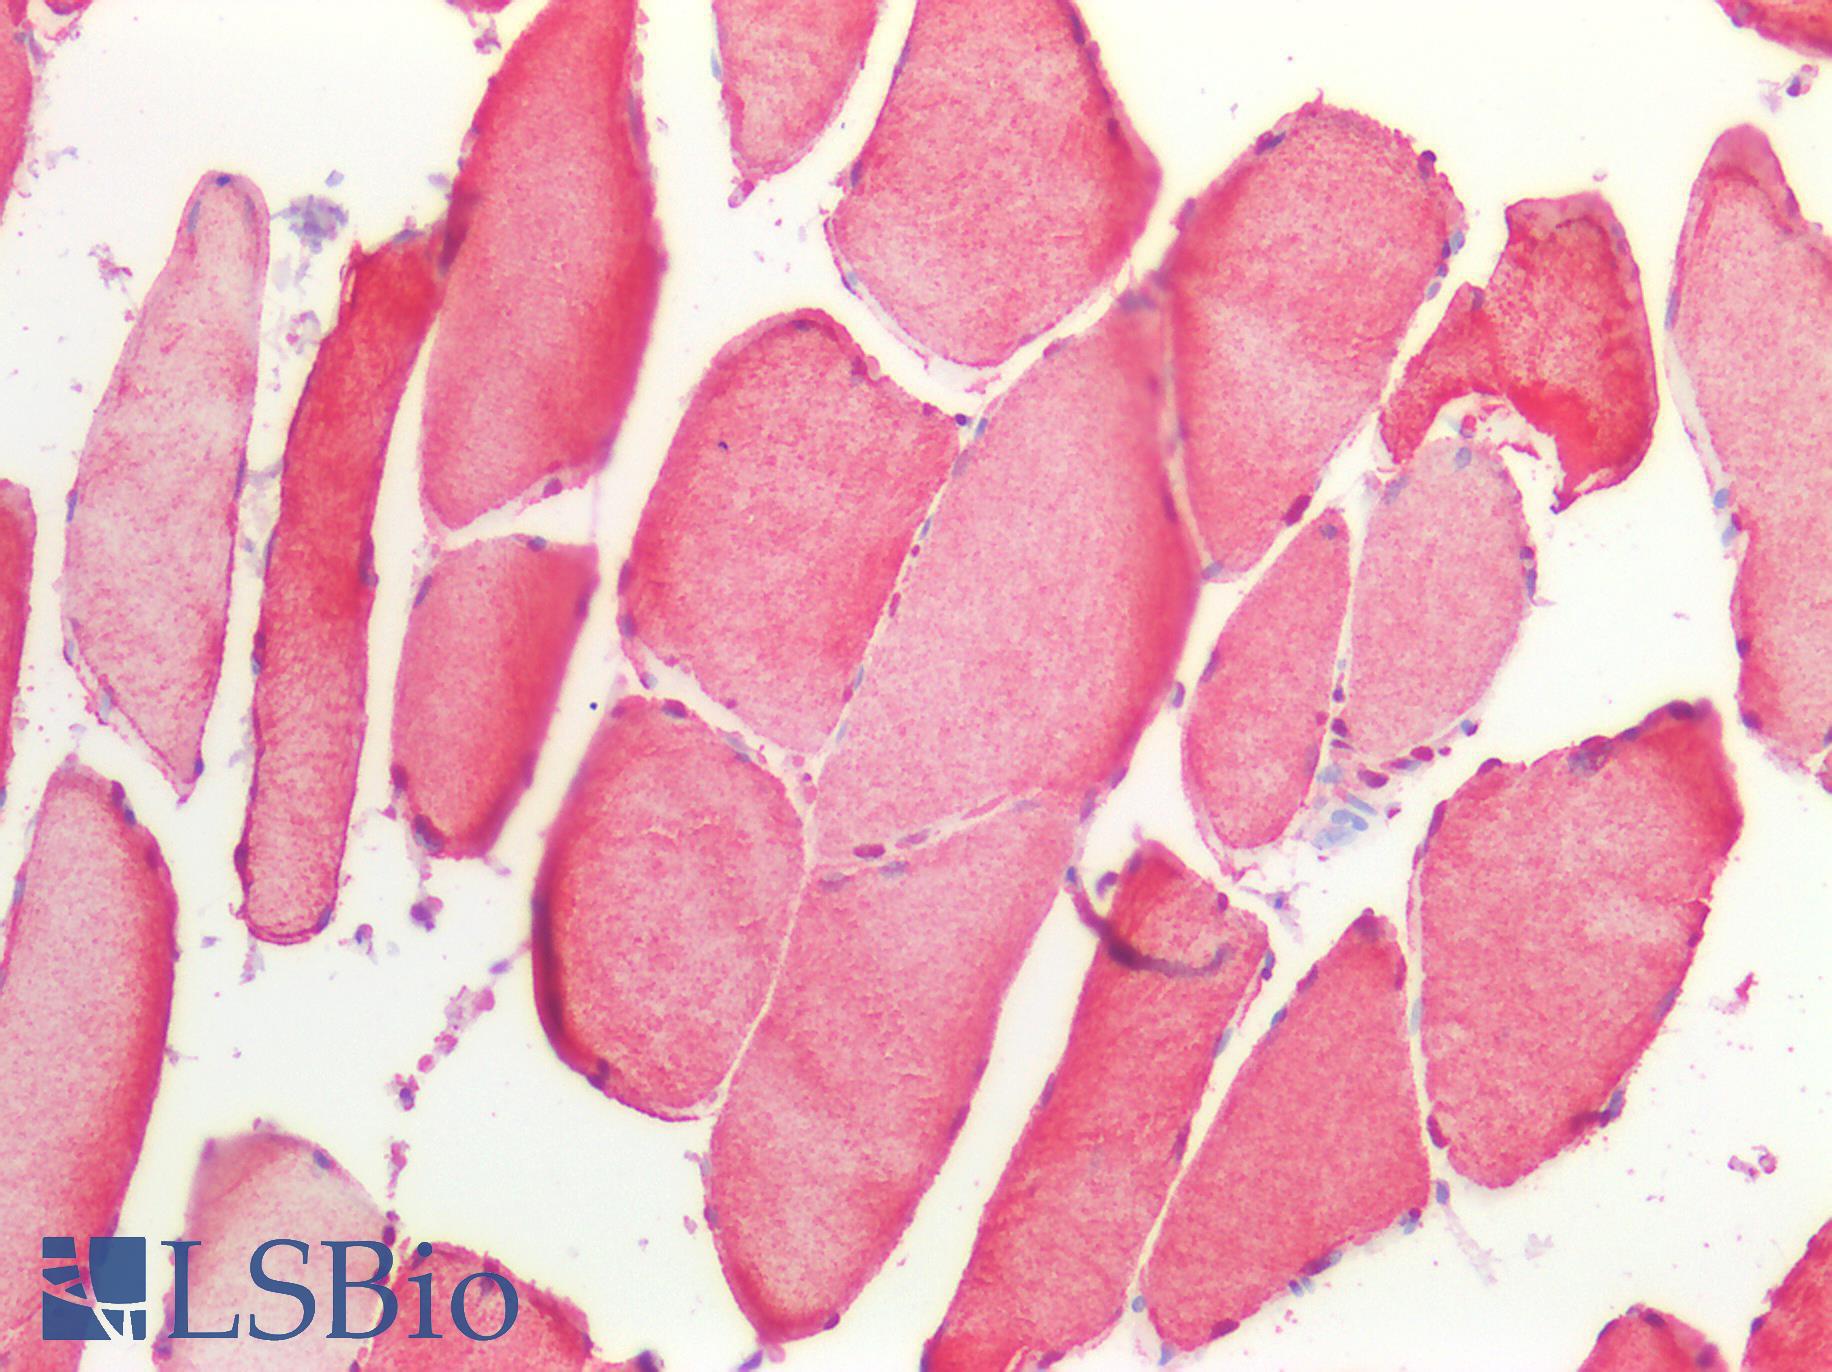 GAPDH Antibody - Human Skeletal Muscle: Formalin-Fixed, Paraffin-Embedded (FFPE)